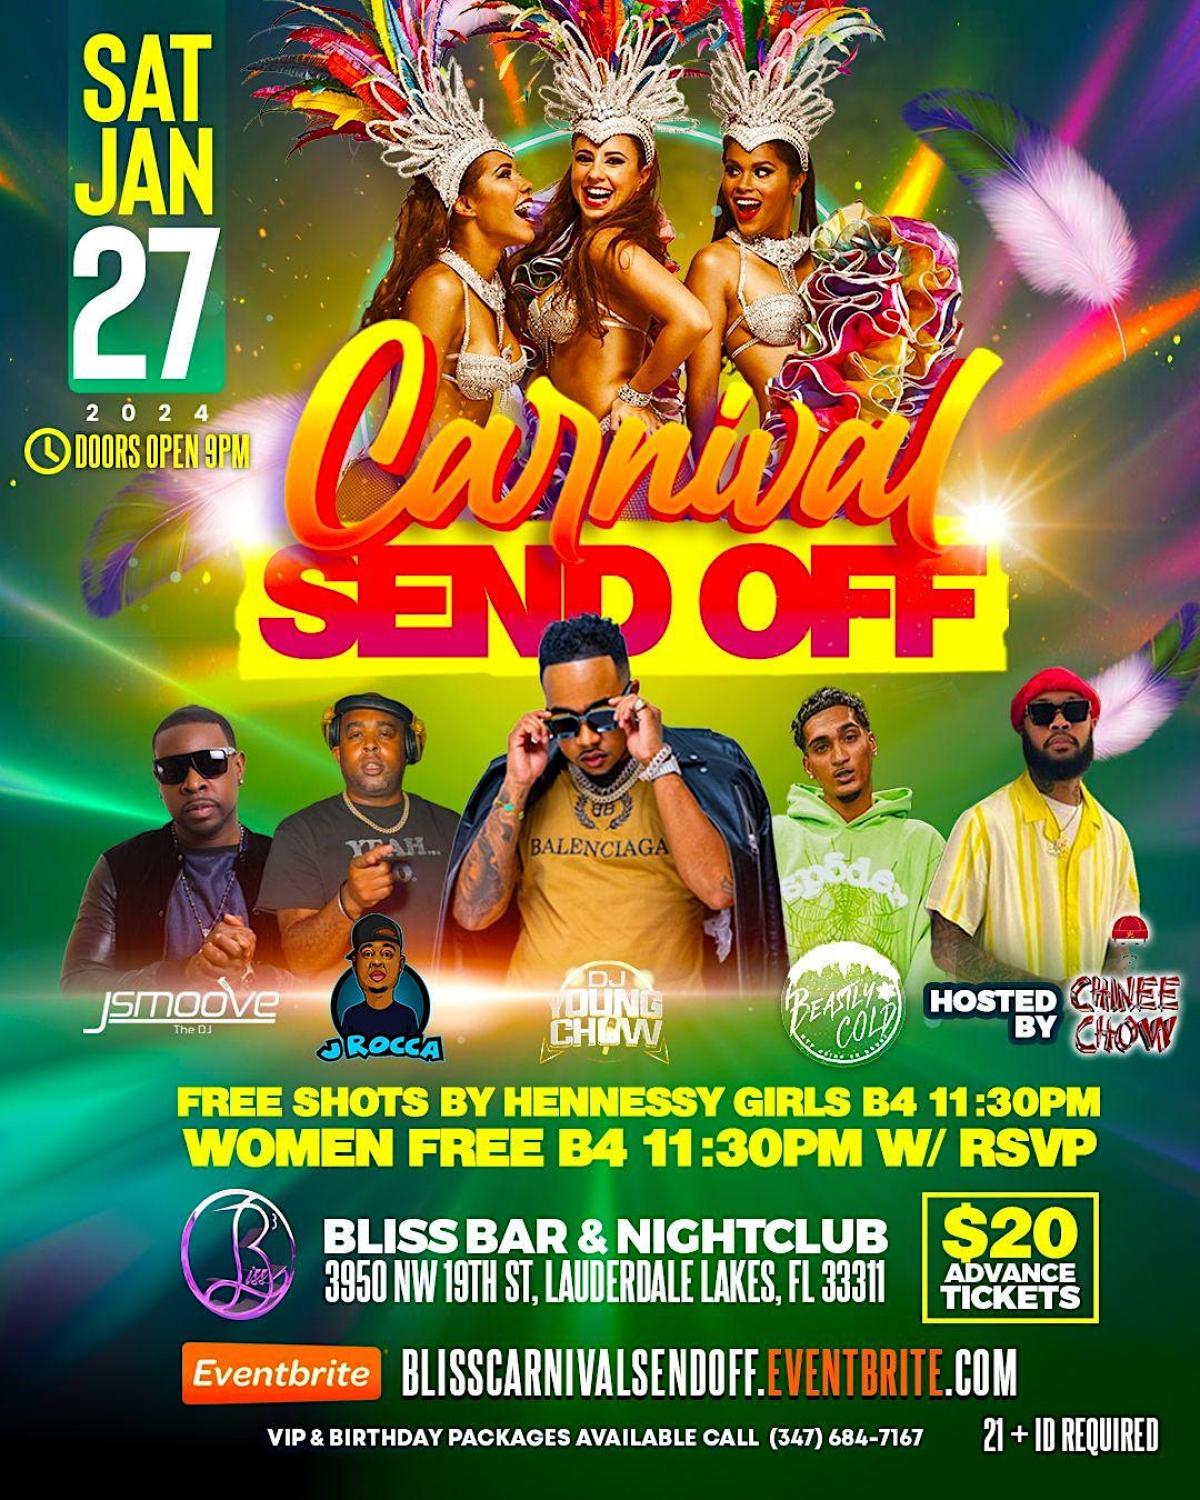 Carnival Send Off flyer or graphic.